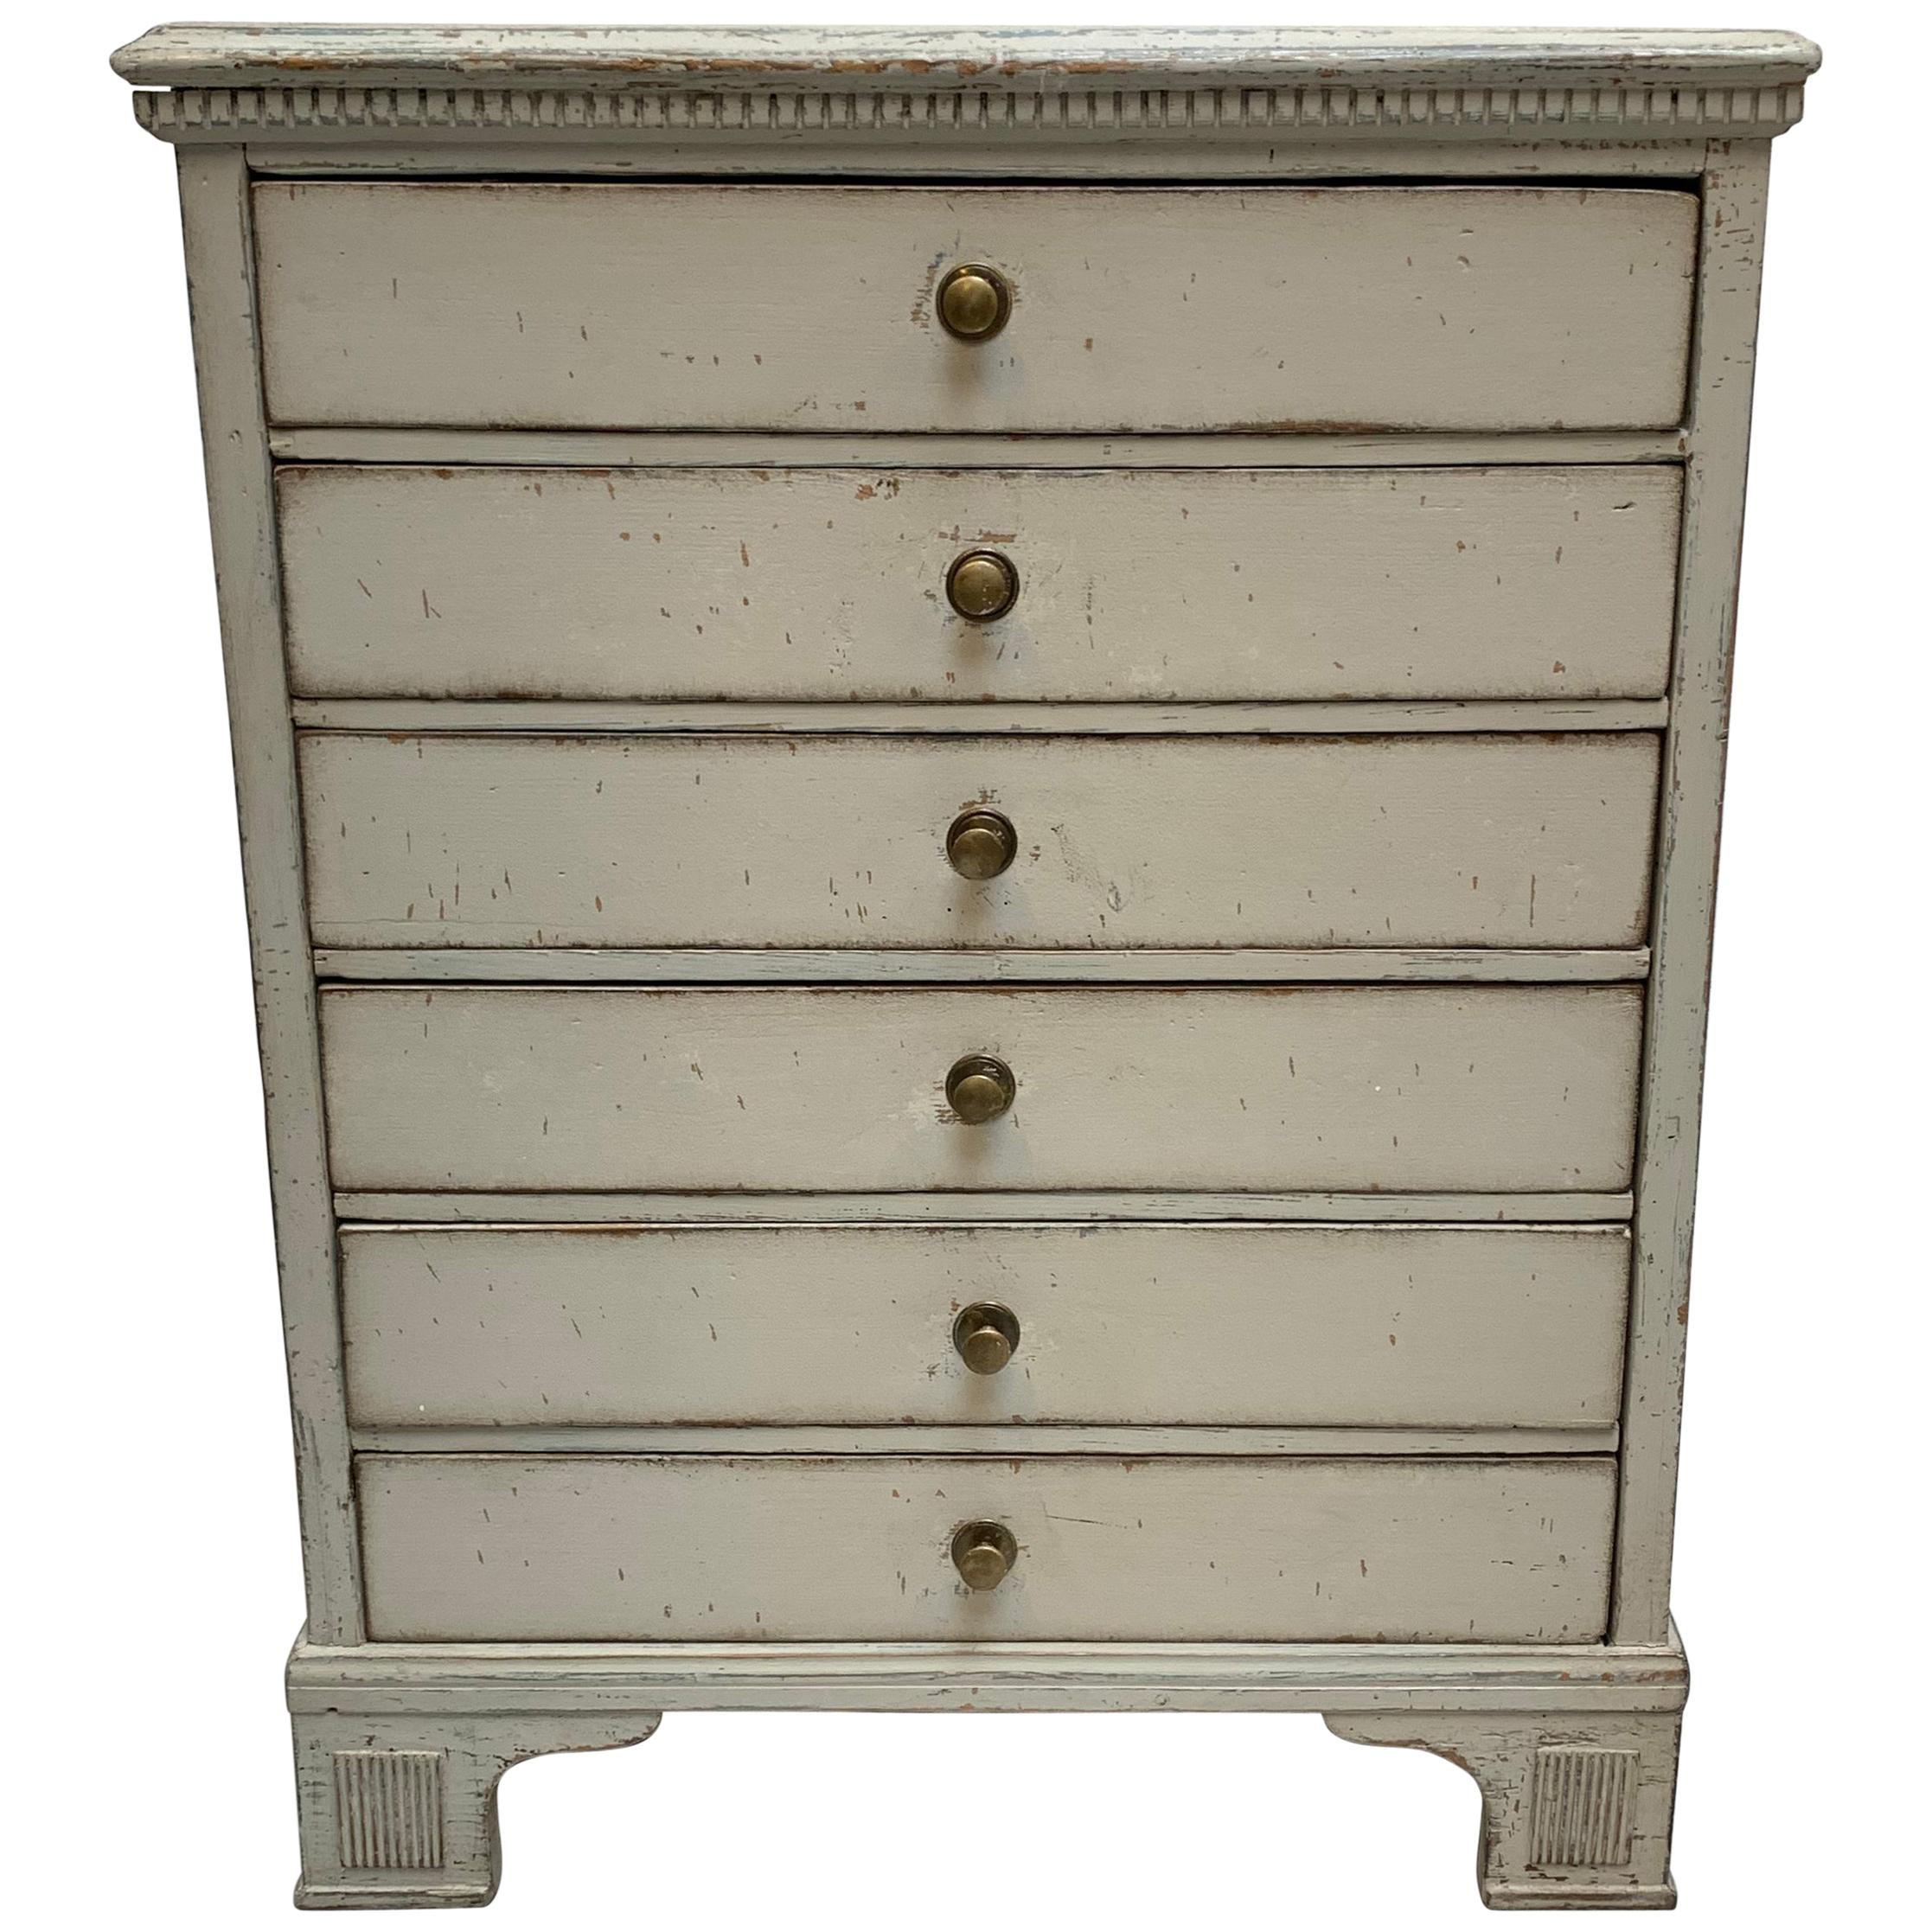 Early 19th Century Gray Painted 6 Drawers Chest Or Dresser